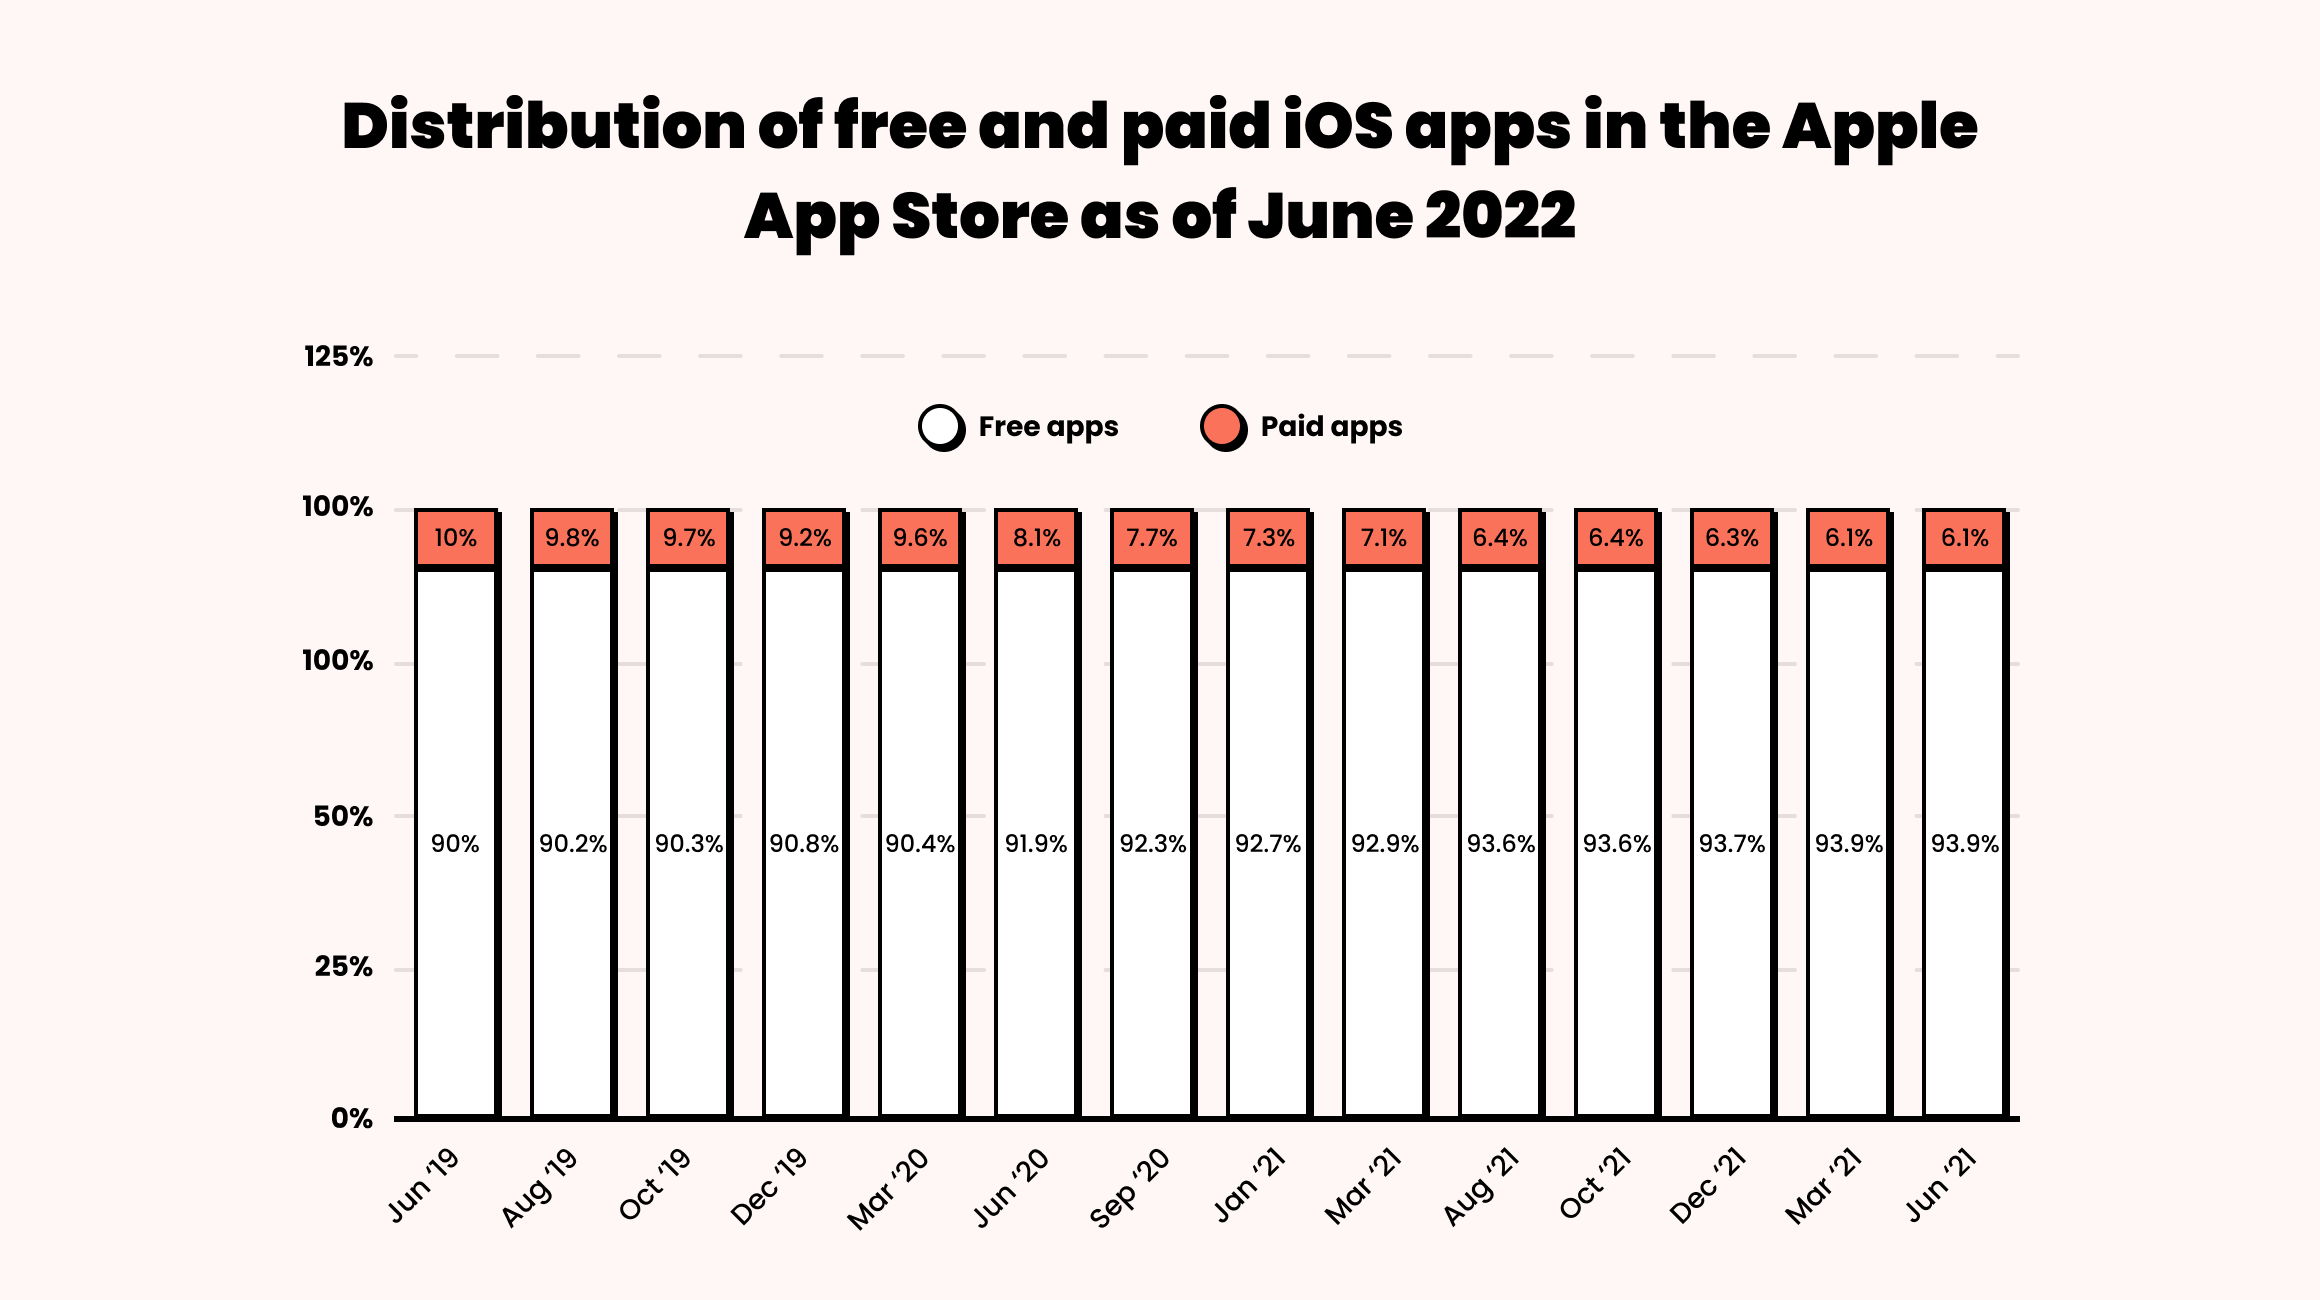 Free vs paid apps in app stores